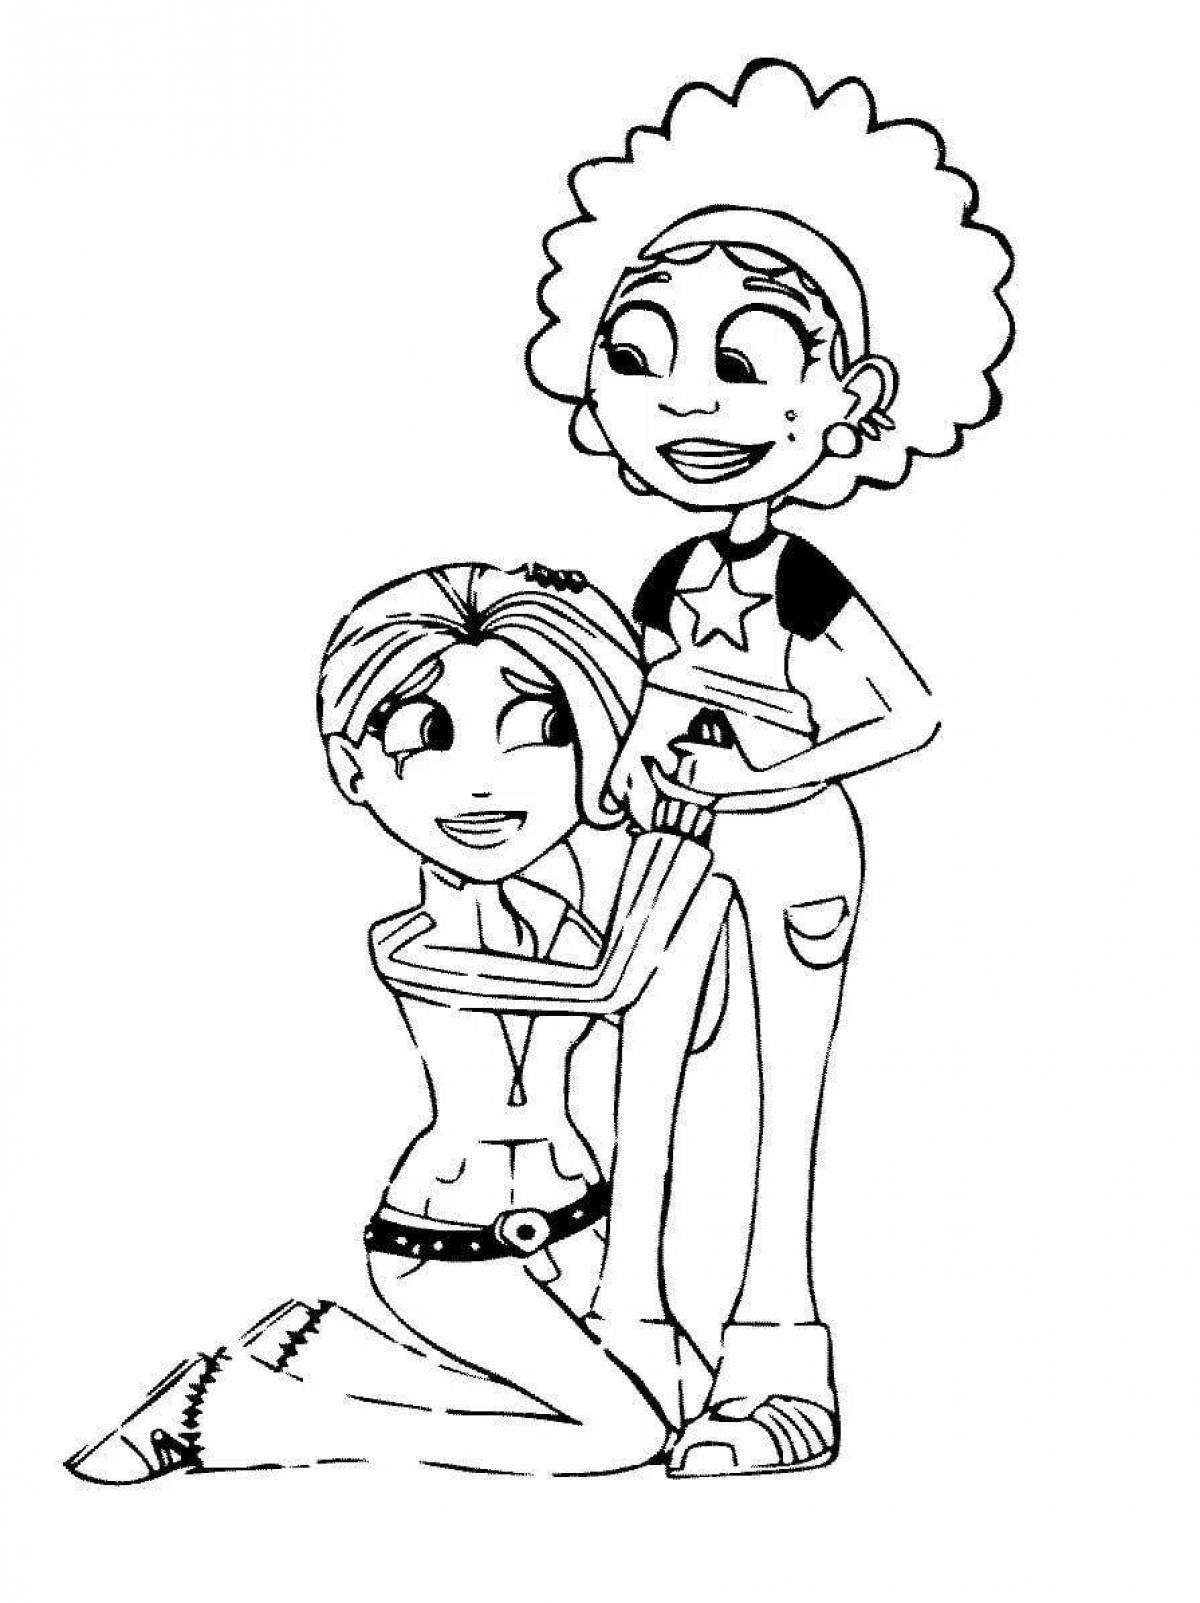 Funny kratt brothers coloring pages